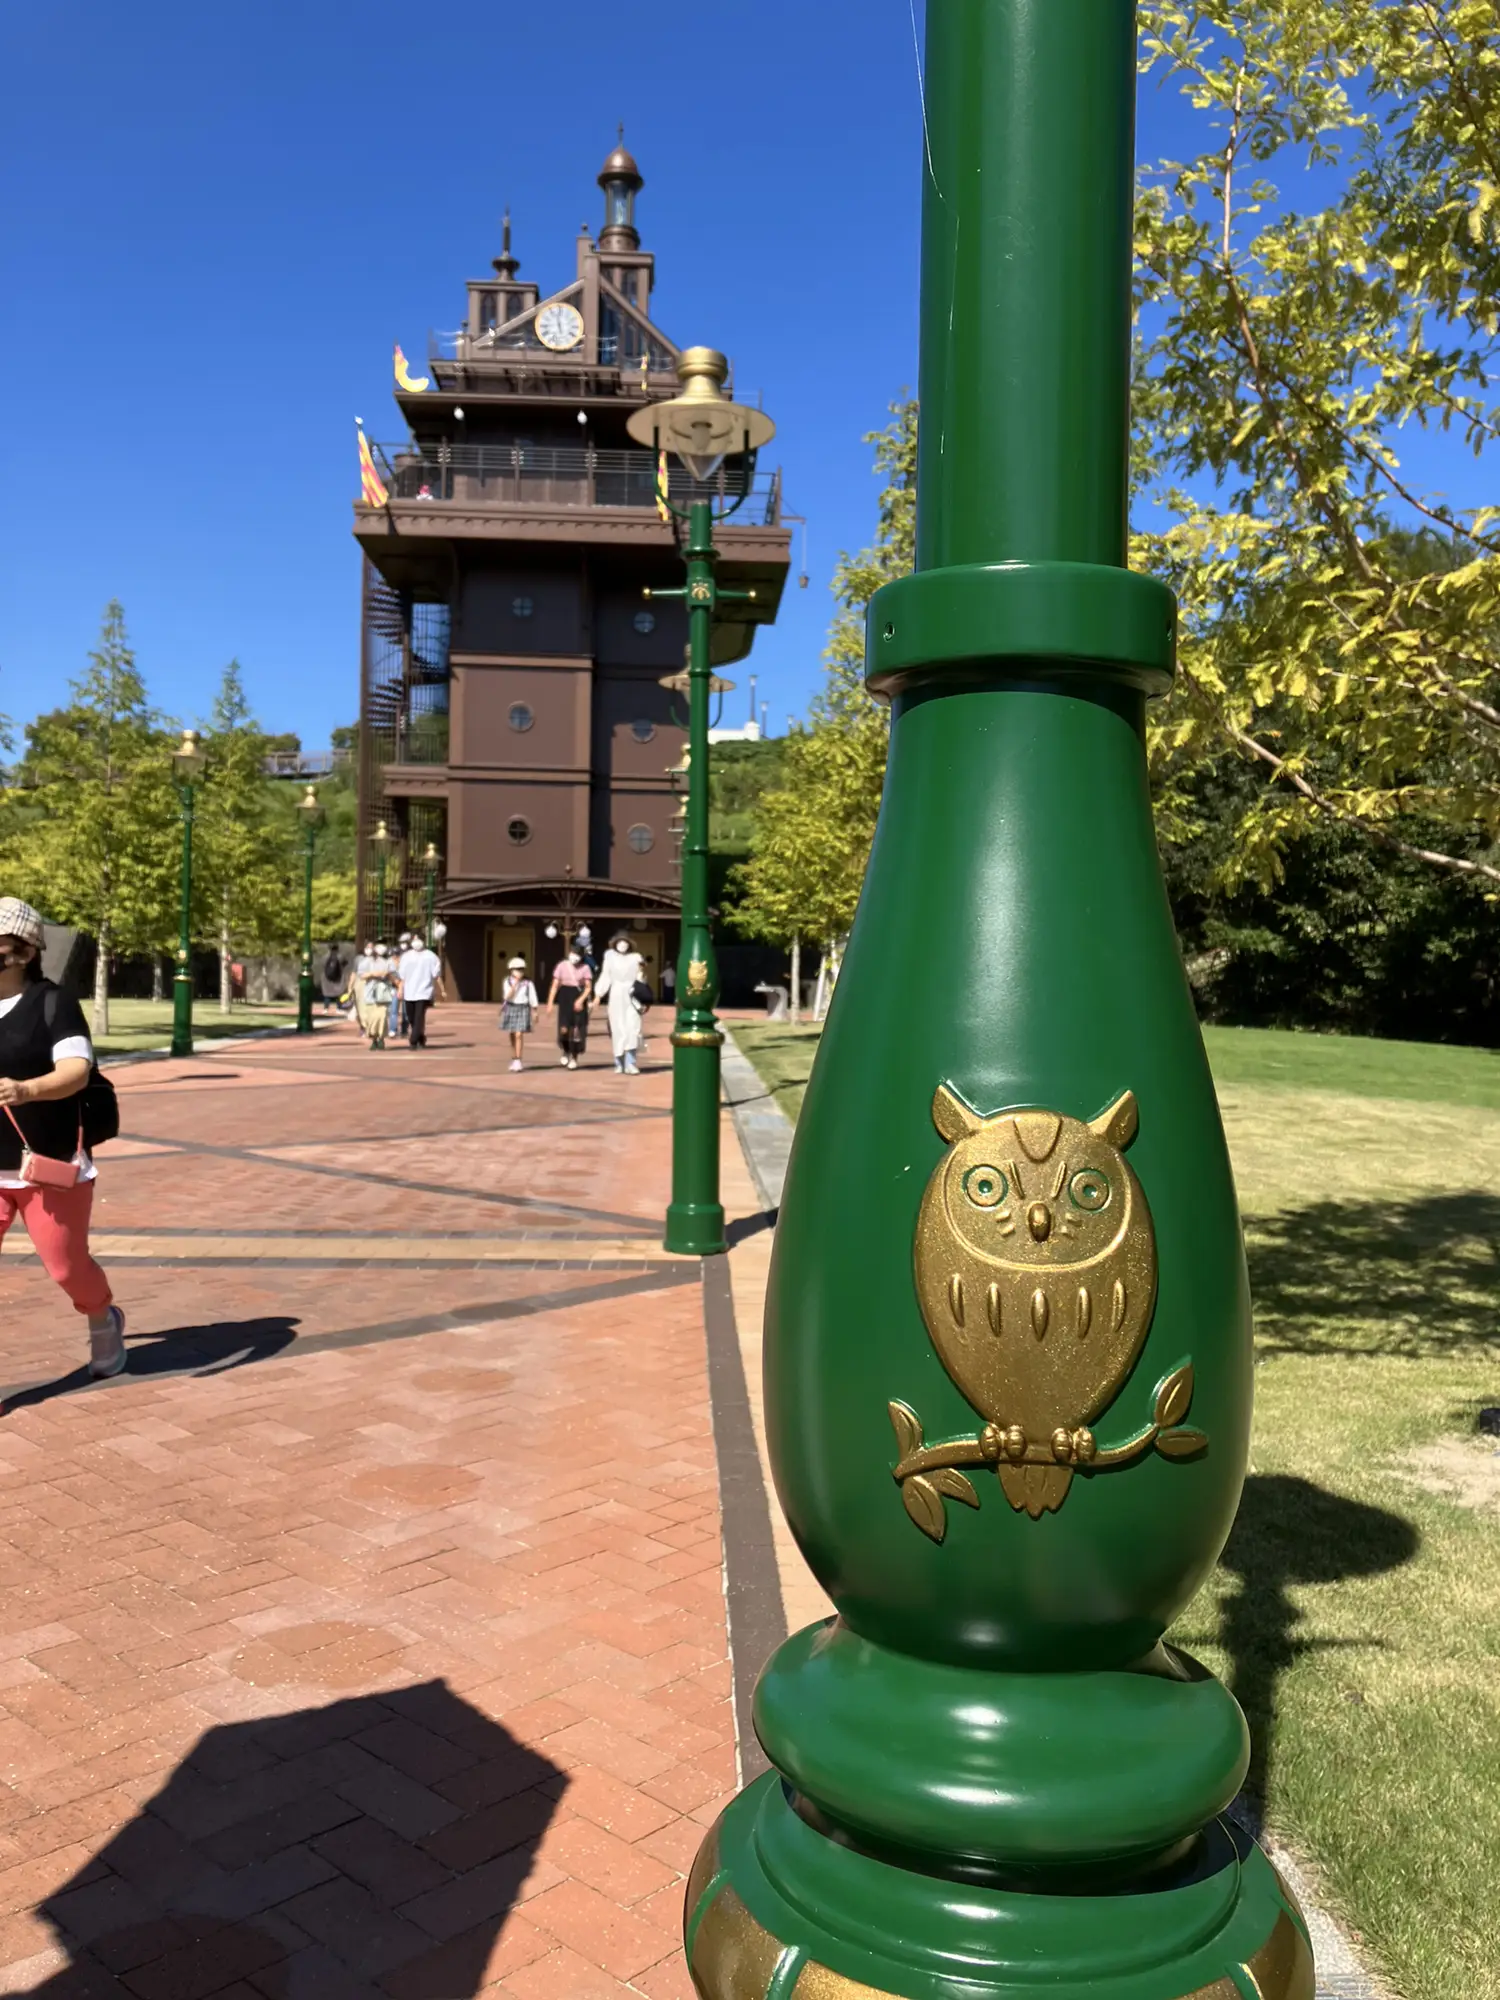 Ghibli Park Preview, Gallery posted by akeminton